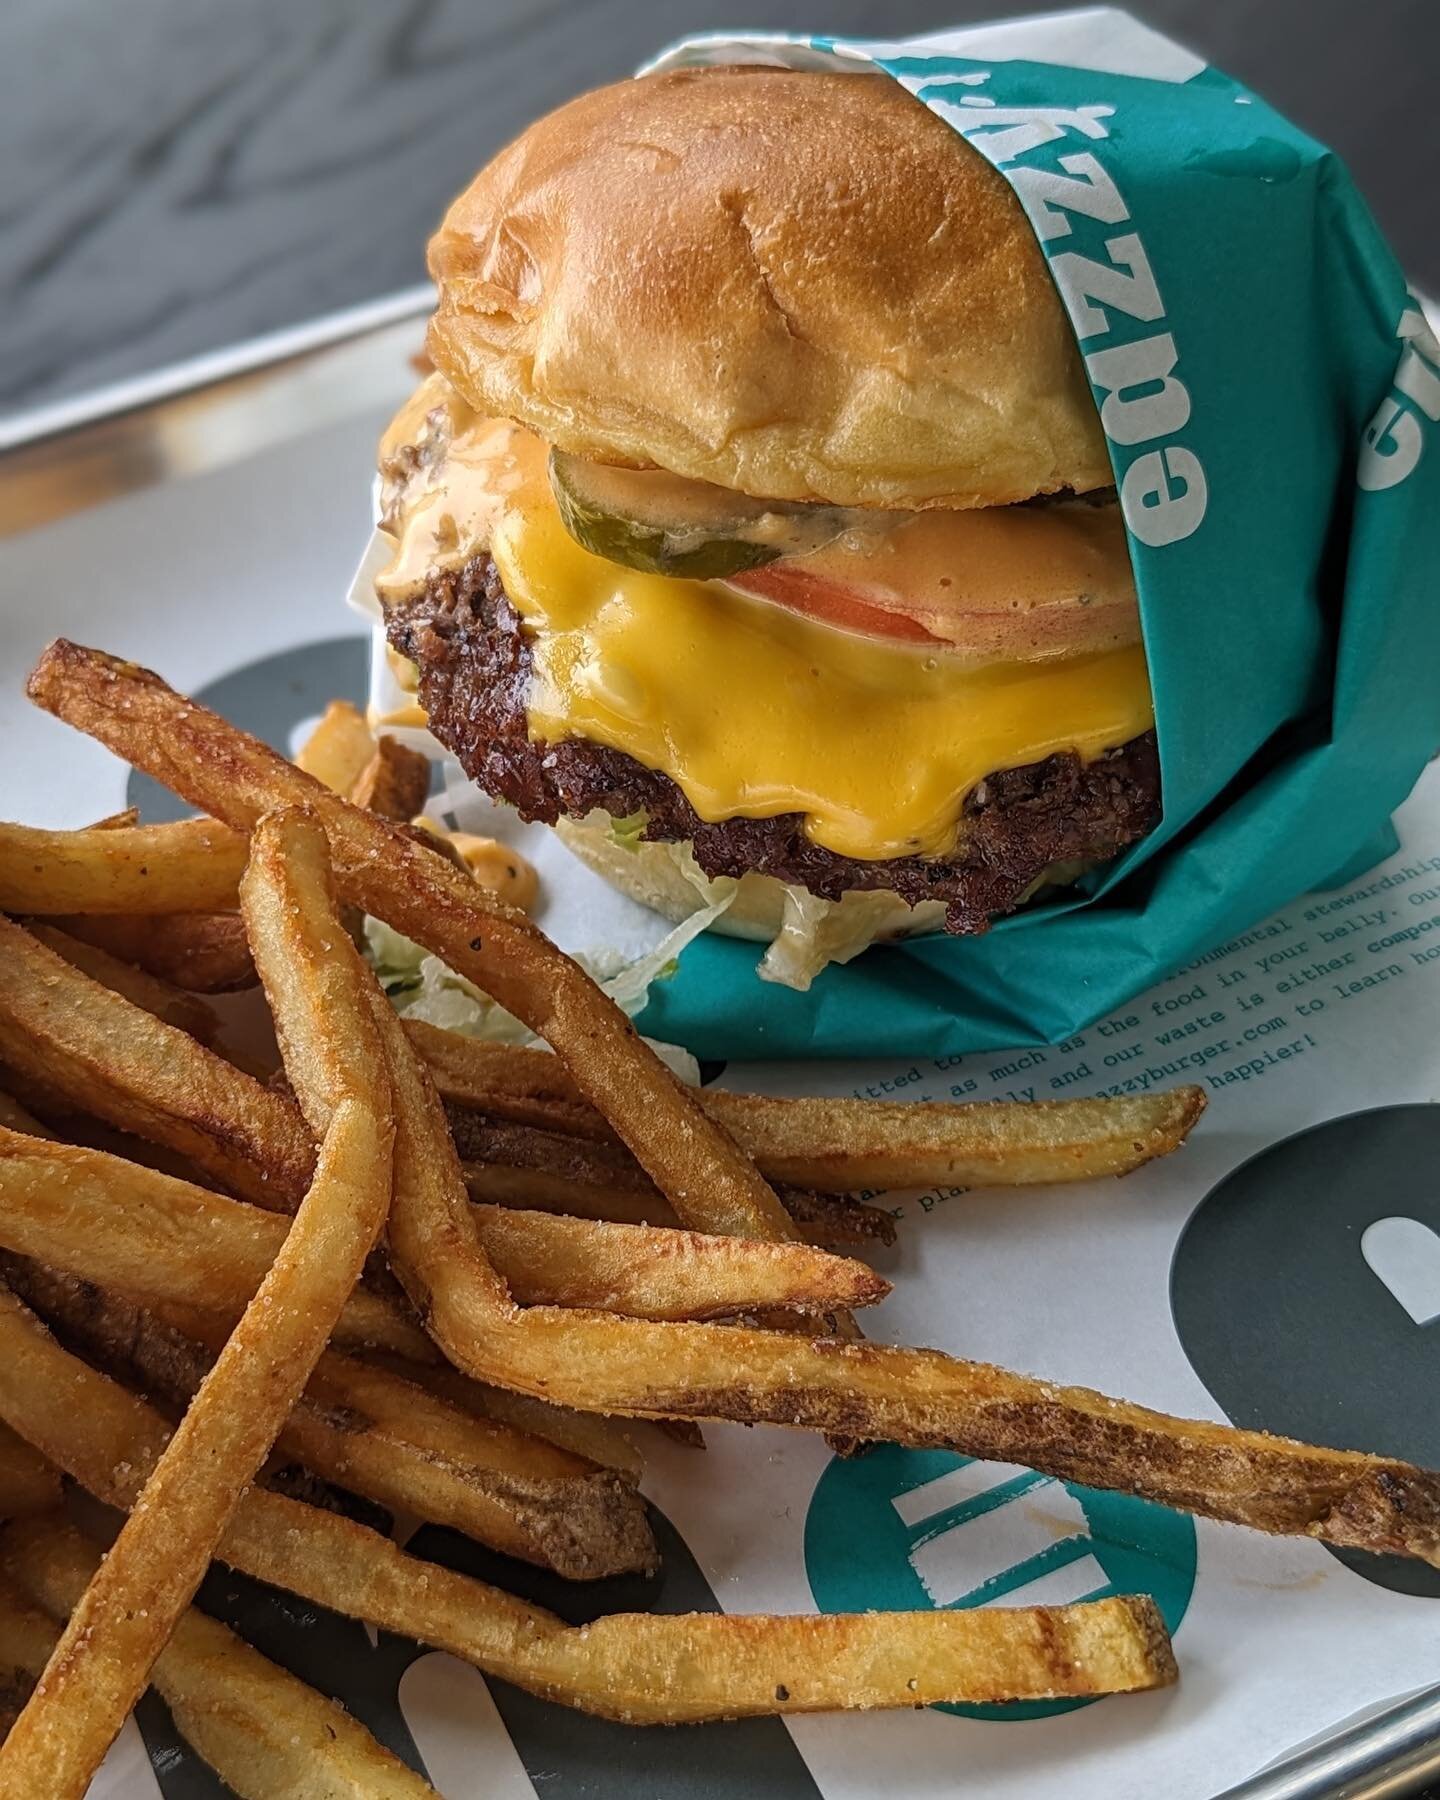 Soak up the sunshine this Saturday and make the Eazzy choice at @eazzyburger's patio! 🍔🌞 Revel in the warmth while feasting on our irresistible burgers and sipping on a tall cold @ardentcraftales 🍺, crafting the perfect weekend experience. Here's 